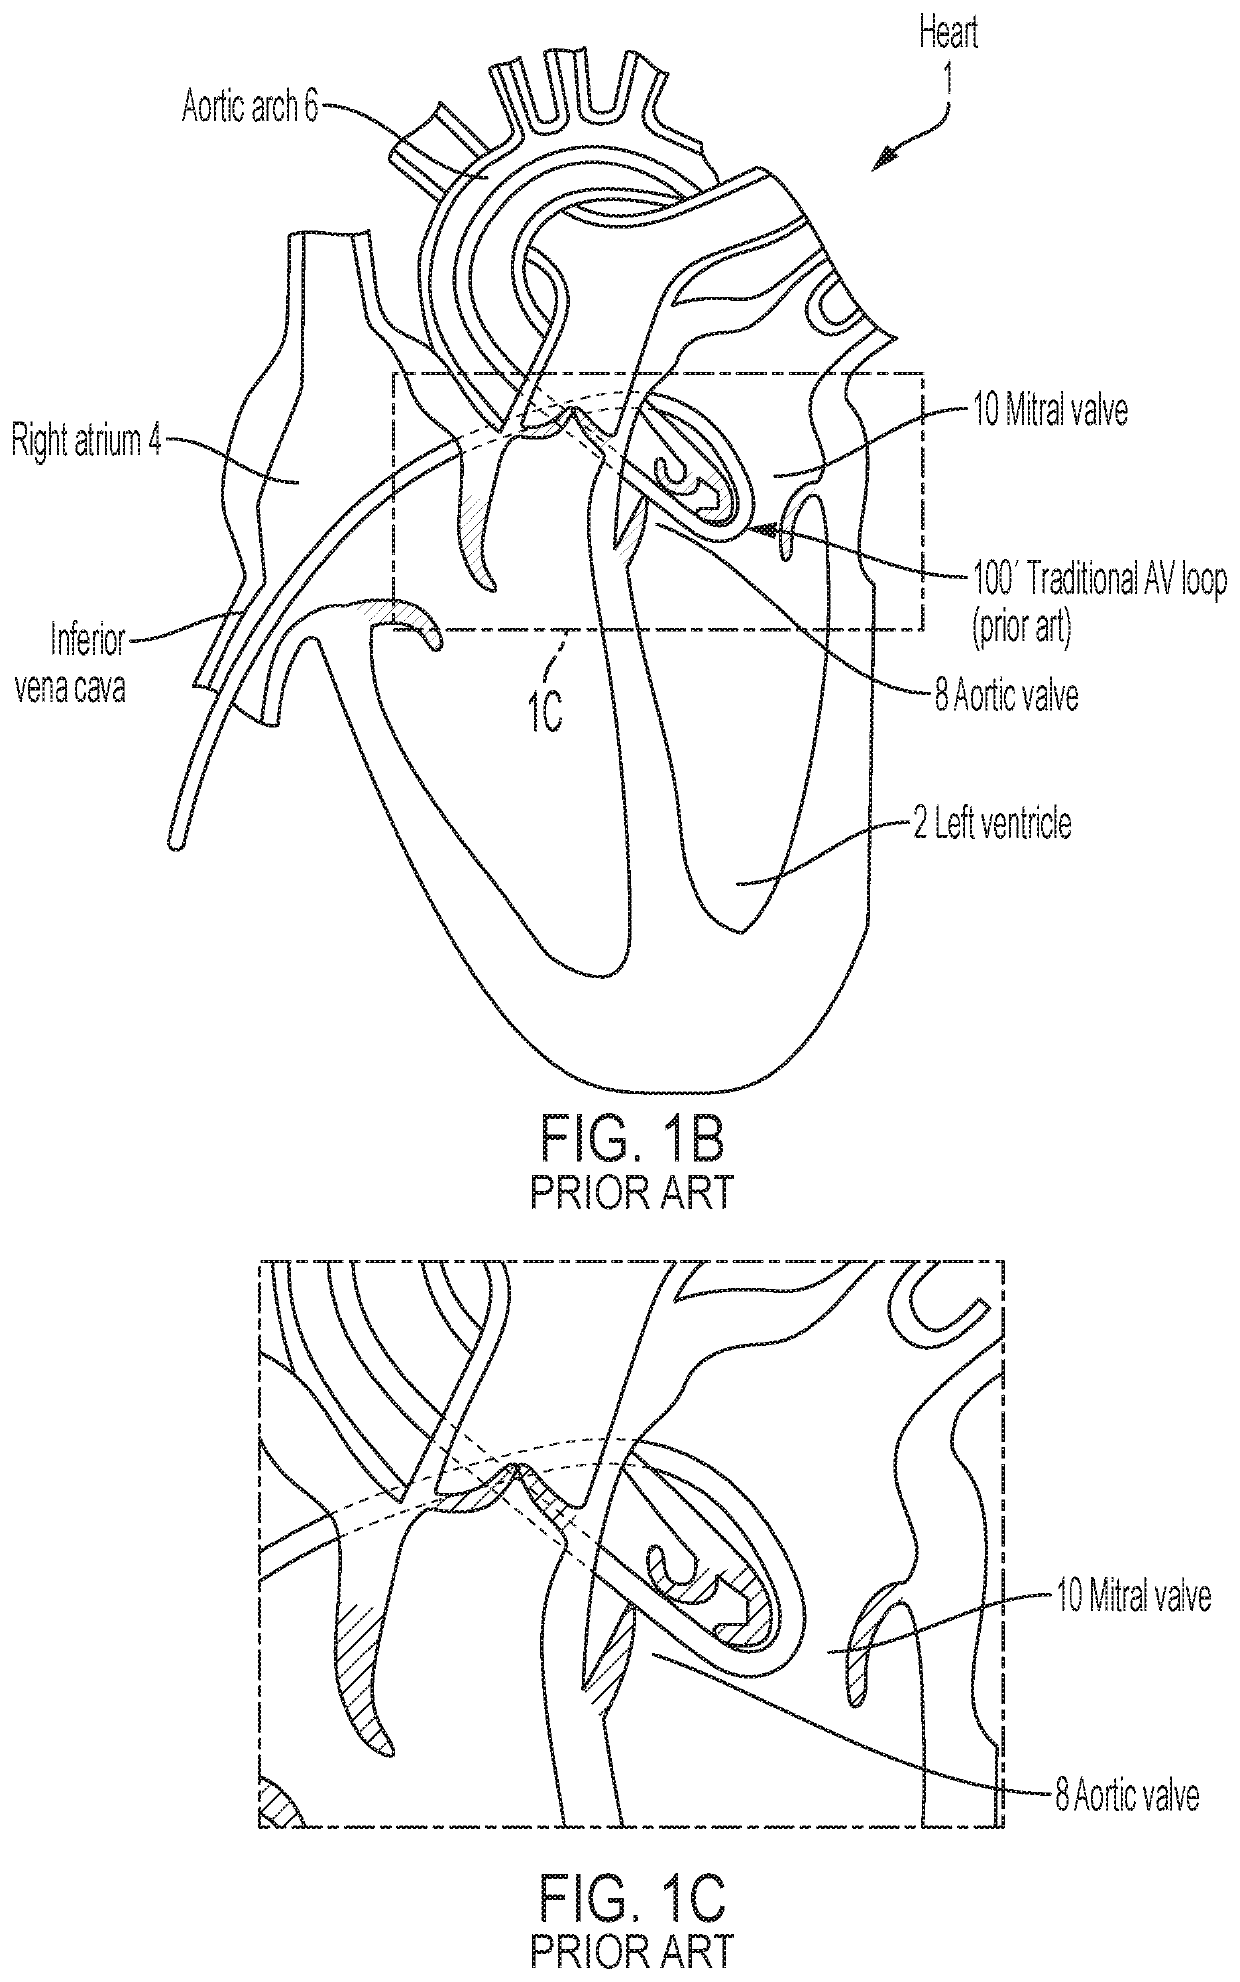 Apparatus and methods for delivery of prosthetic heart valves